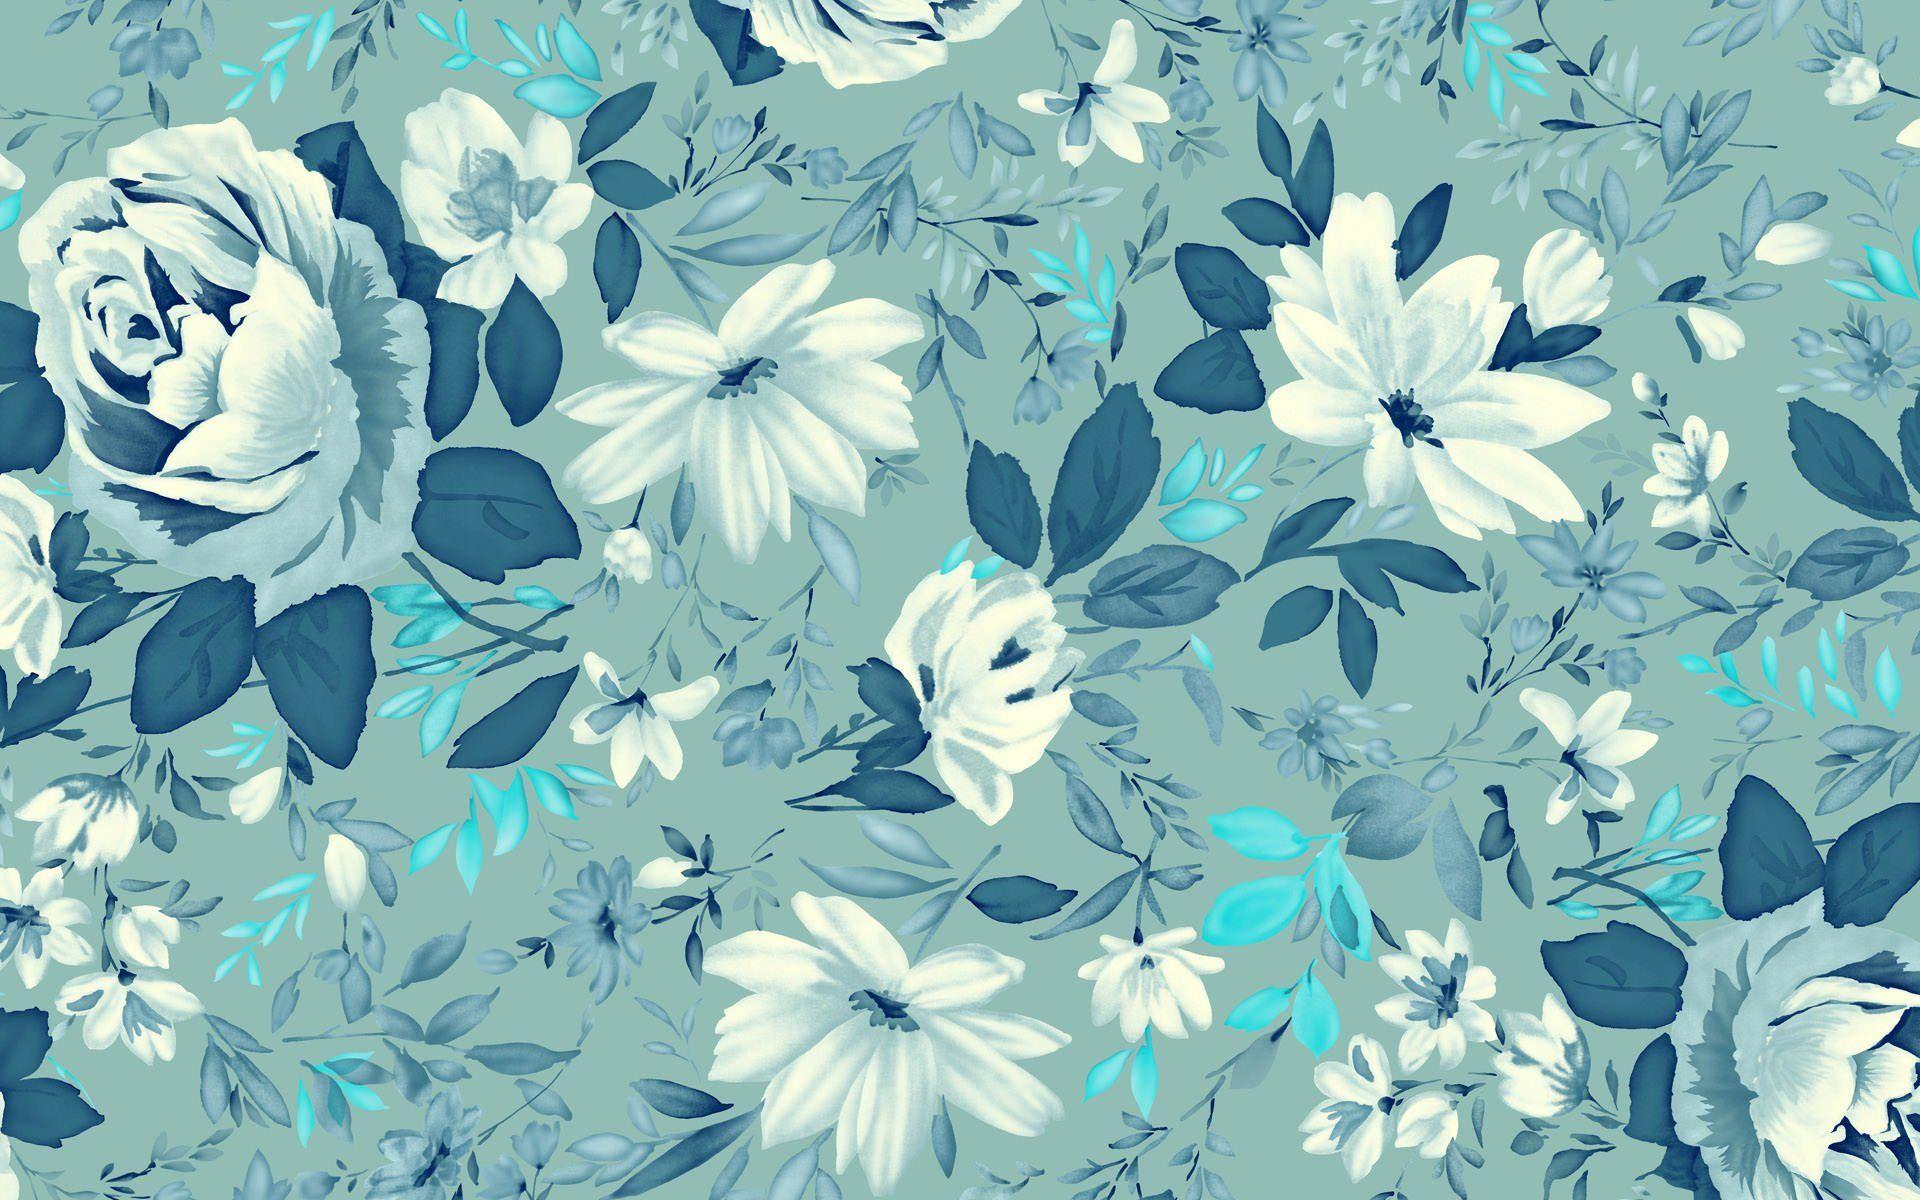 Blue Flower Tumblr Wallpapers Top Free Blue Flower Tumblr Backgrounds Wallpaperaccess